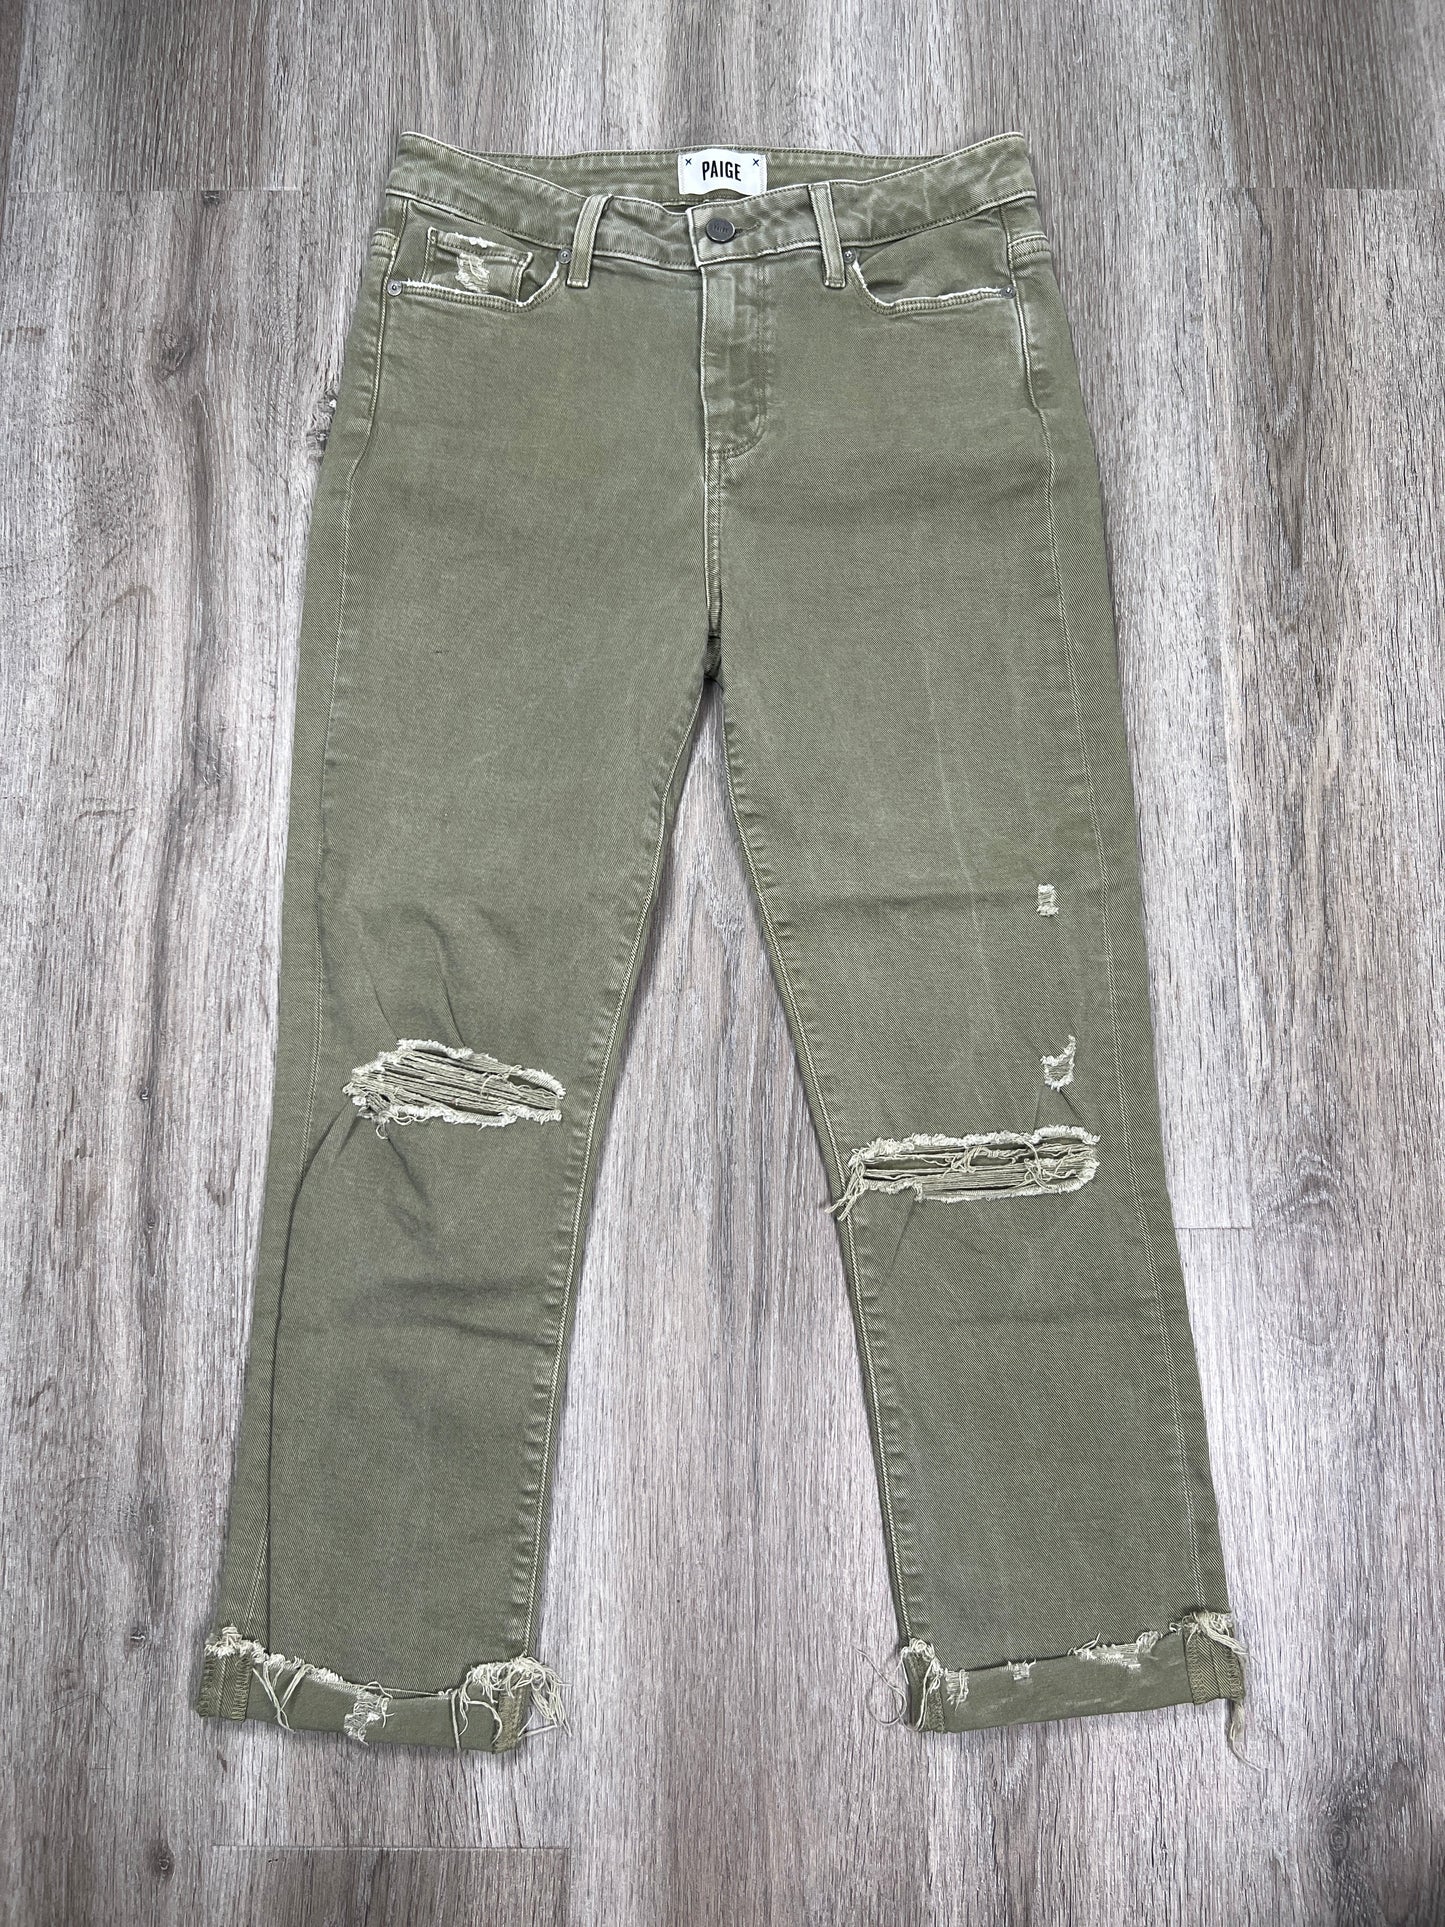 Green Denim Jeans Cropped Paige, Size 8